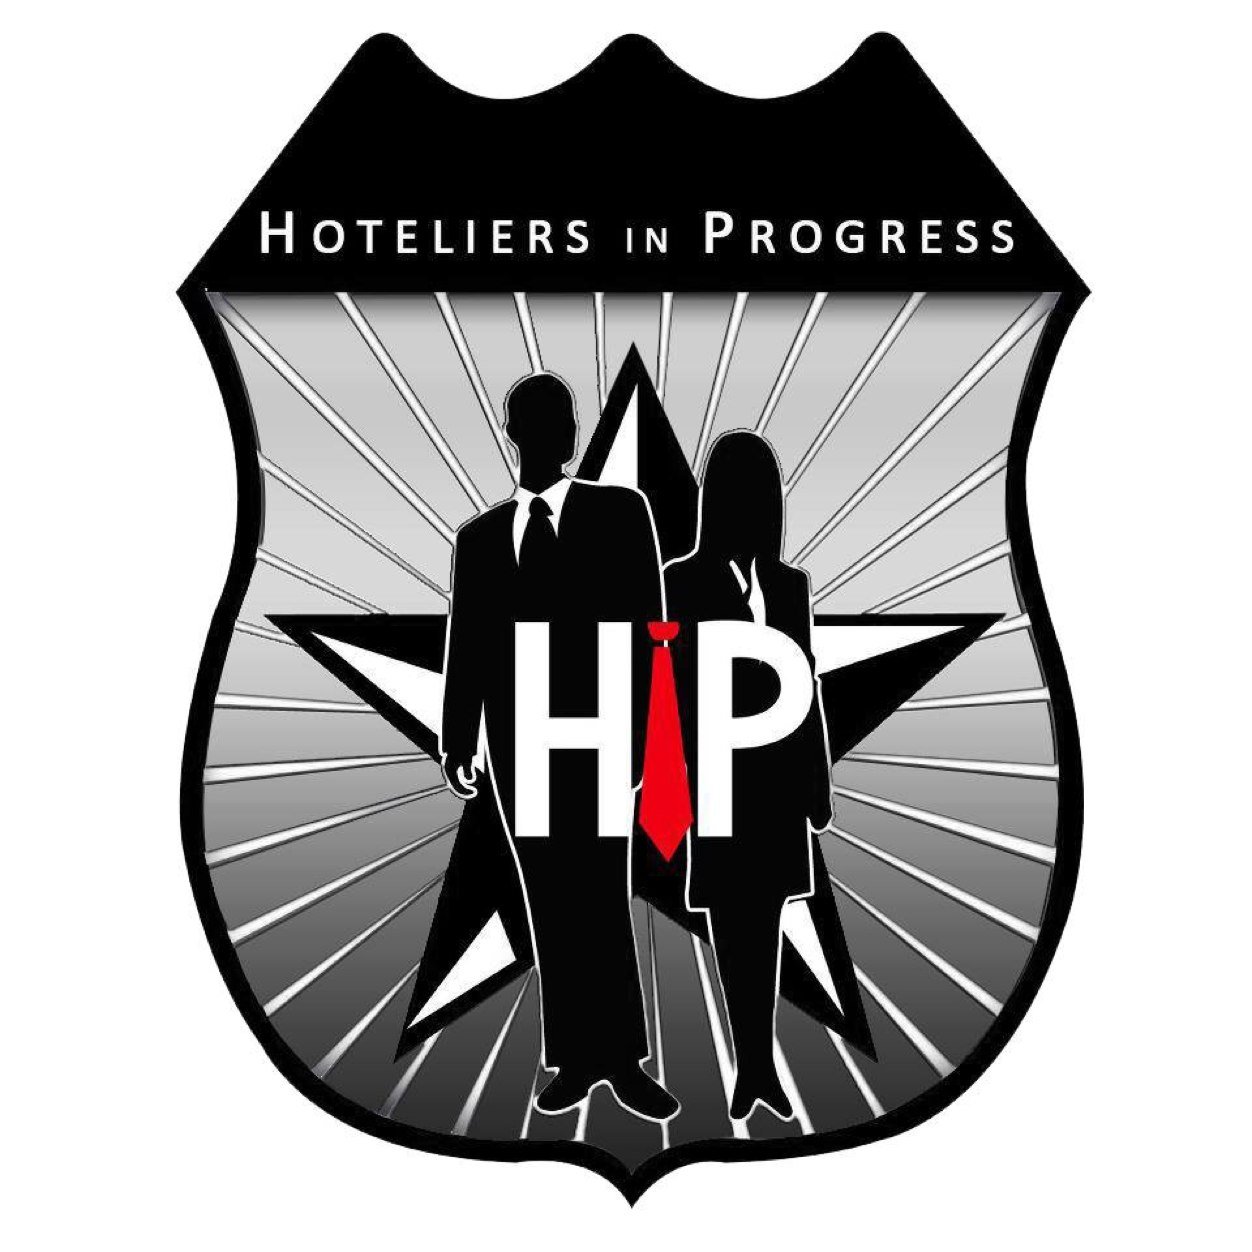 Hoteliers in Progress (H.I.P.) is an organization composed of students specializing in Hospitality Management (SHRIM) of De La Salle-College of Saint Benilde.